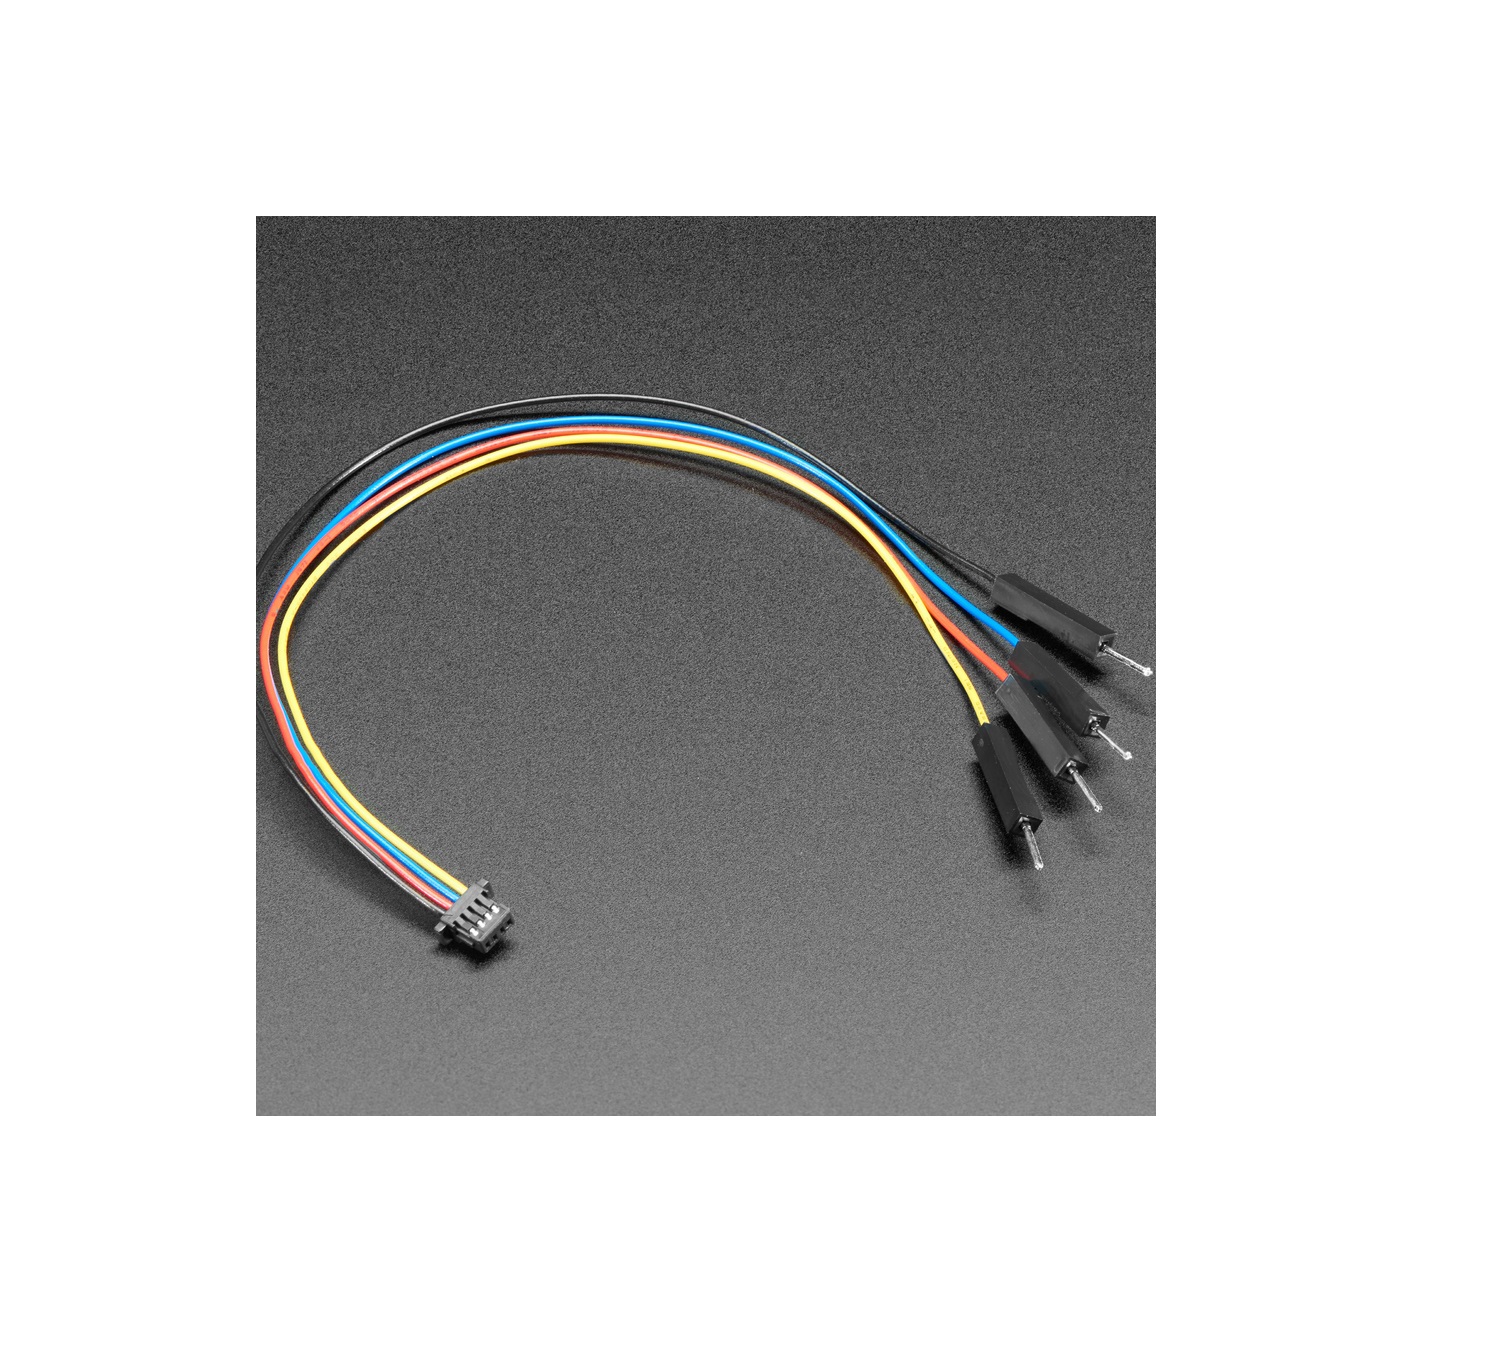 Adafruit STEMMA QT / Qwiic JST SH 4-pin to Premium Male Headers Cable -  150mm Long -  | Indian Online Store | RC Hobby | Robotics